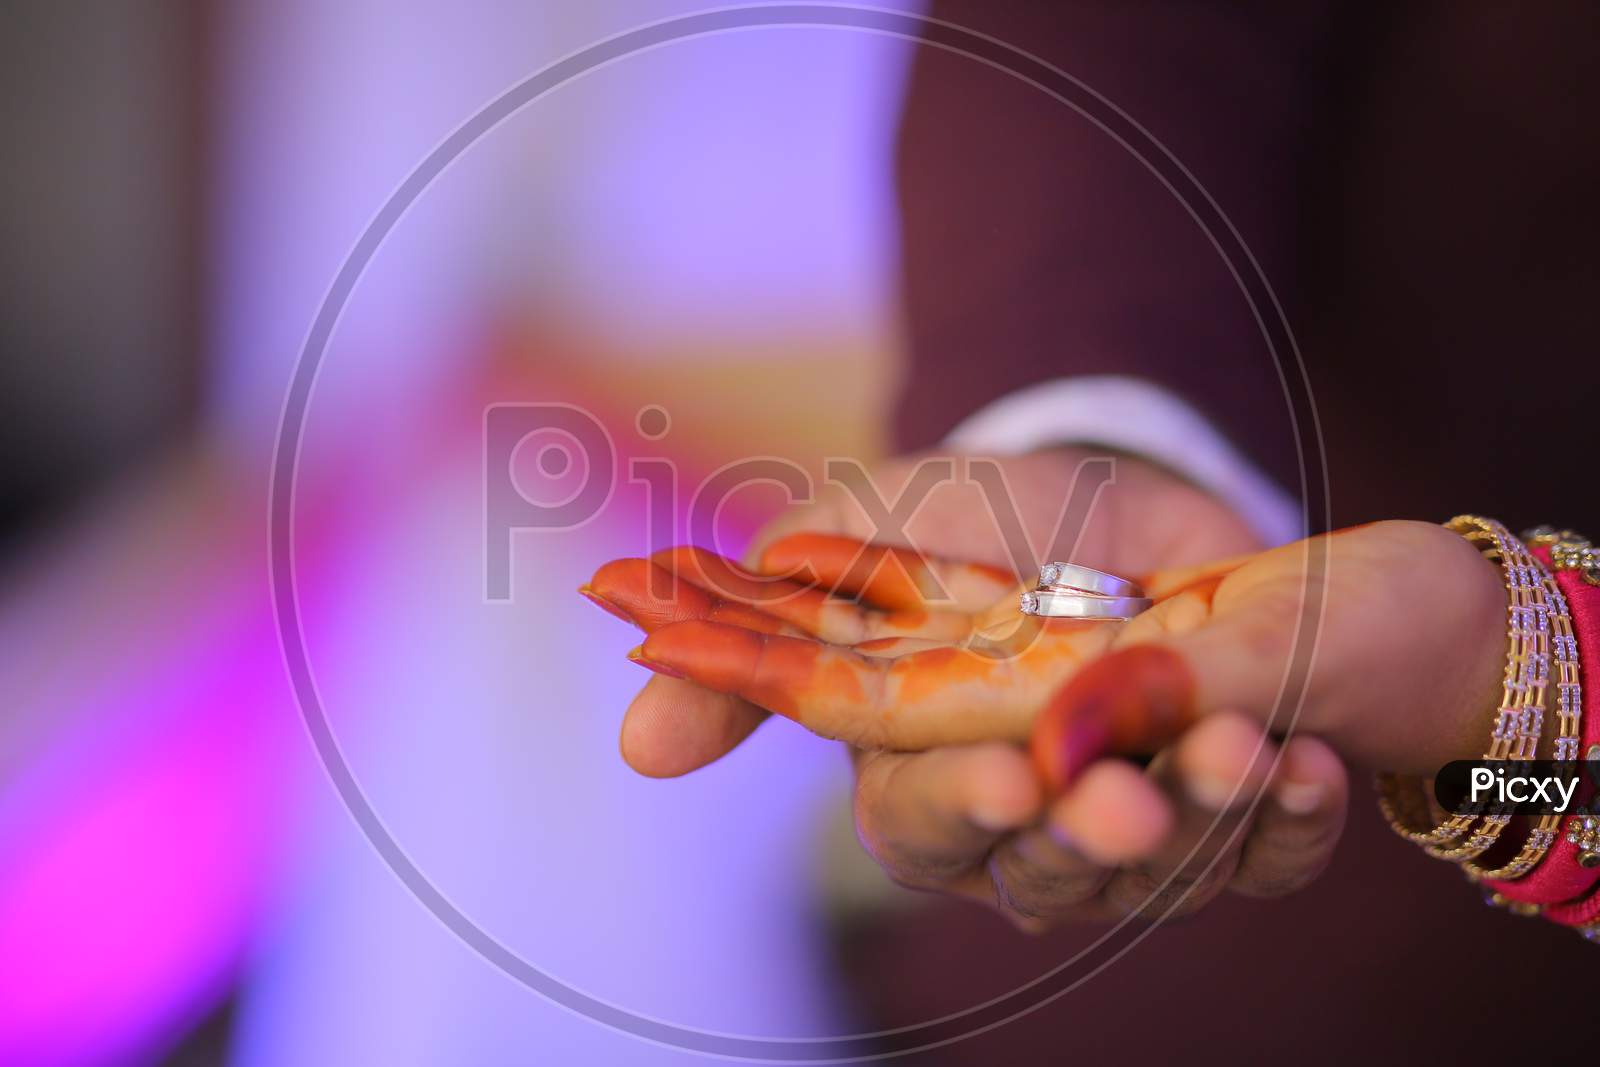 Indian Bride holding engagement ring in hand